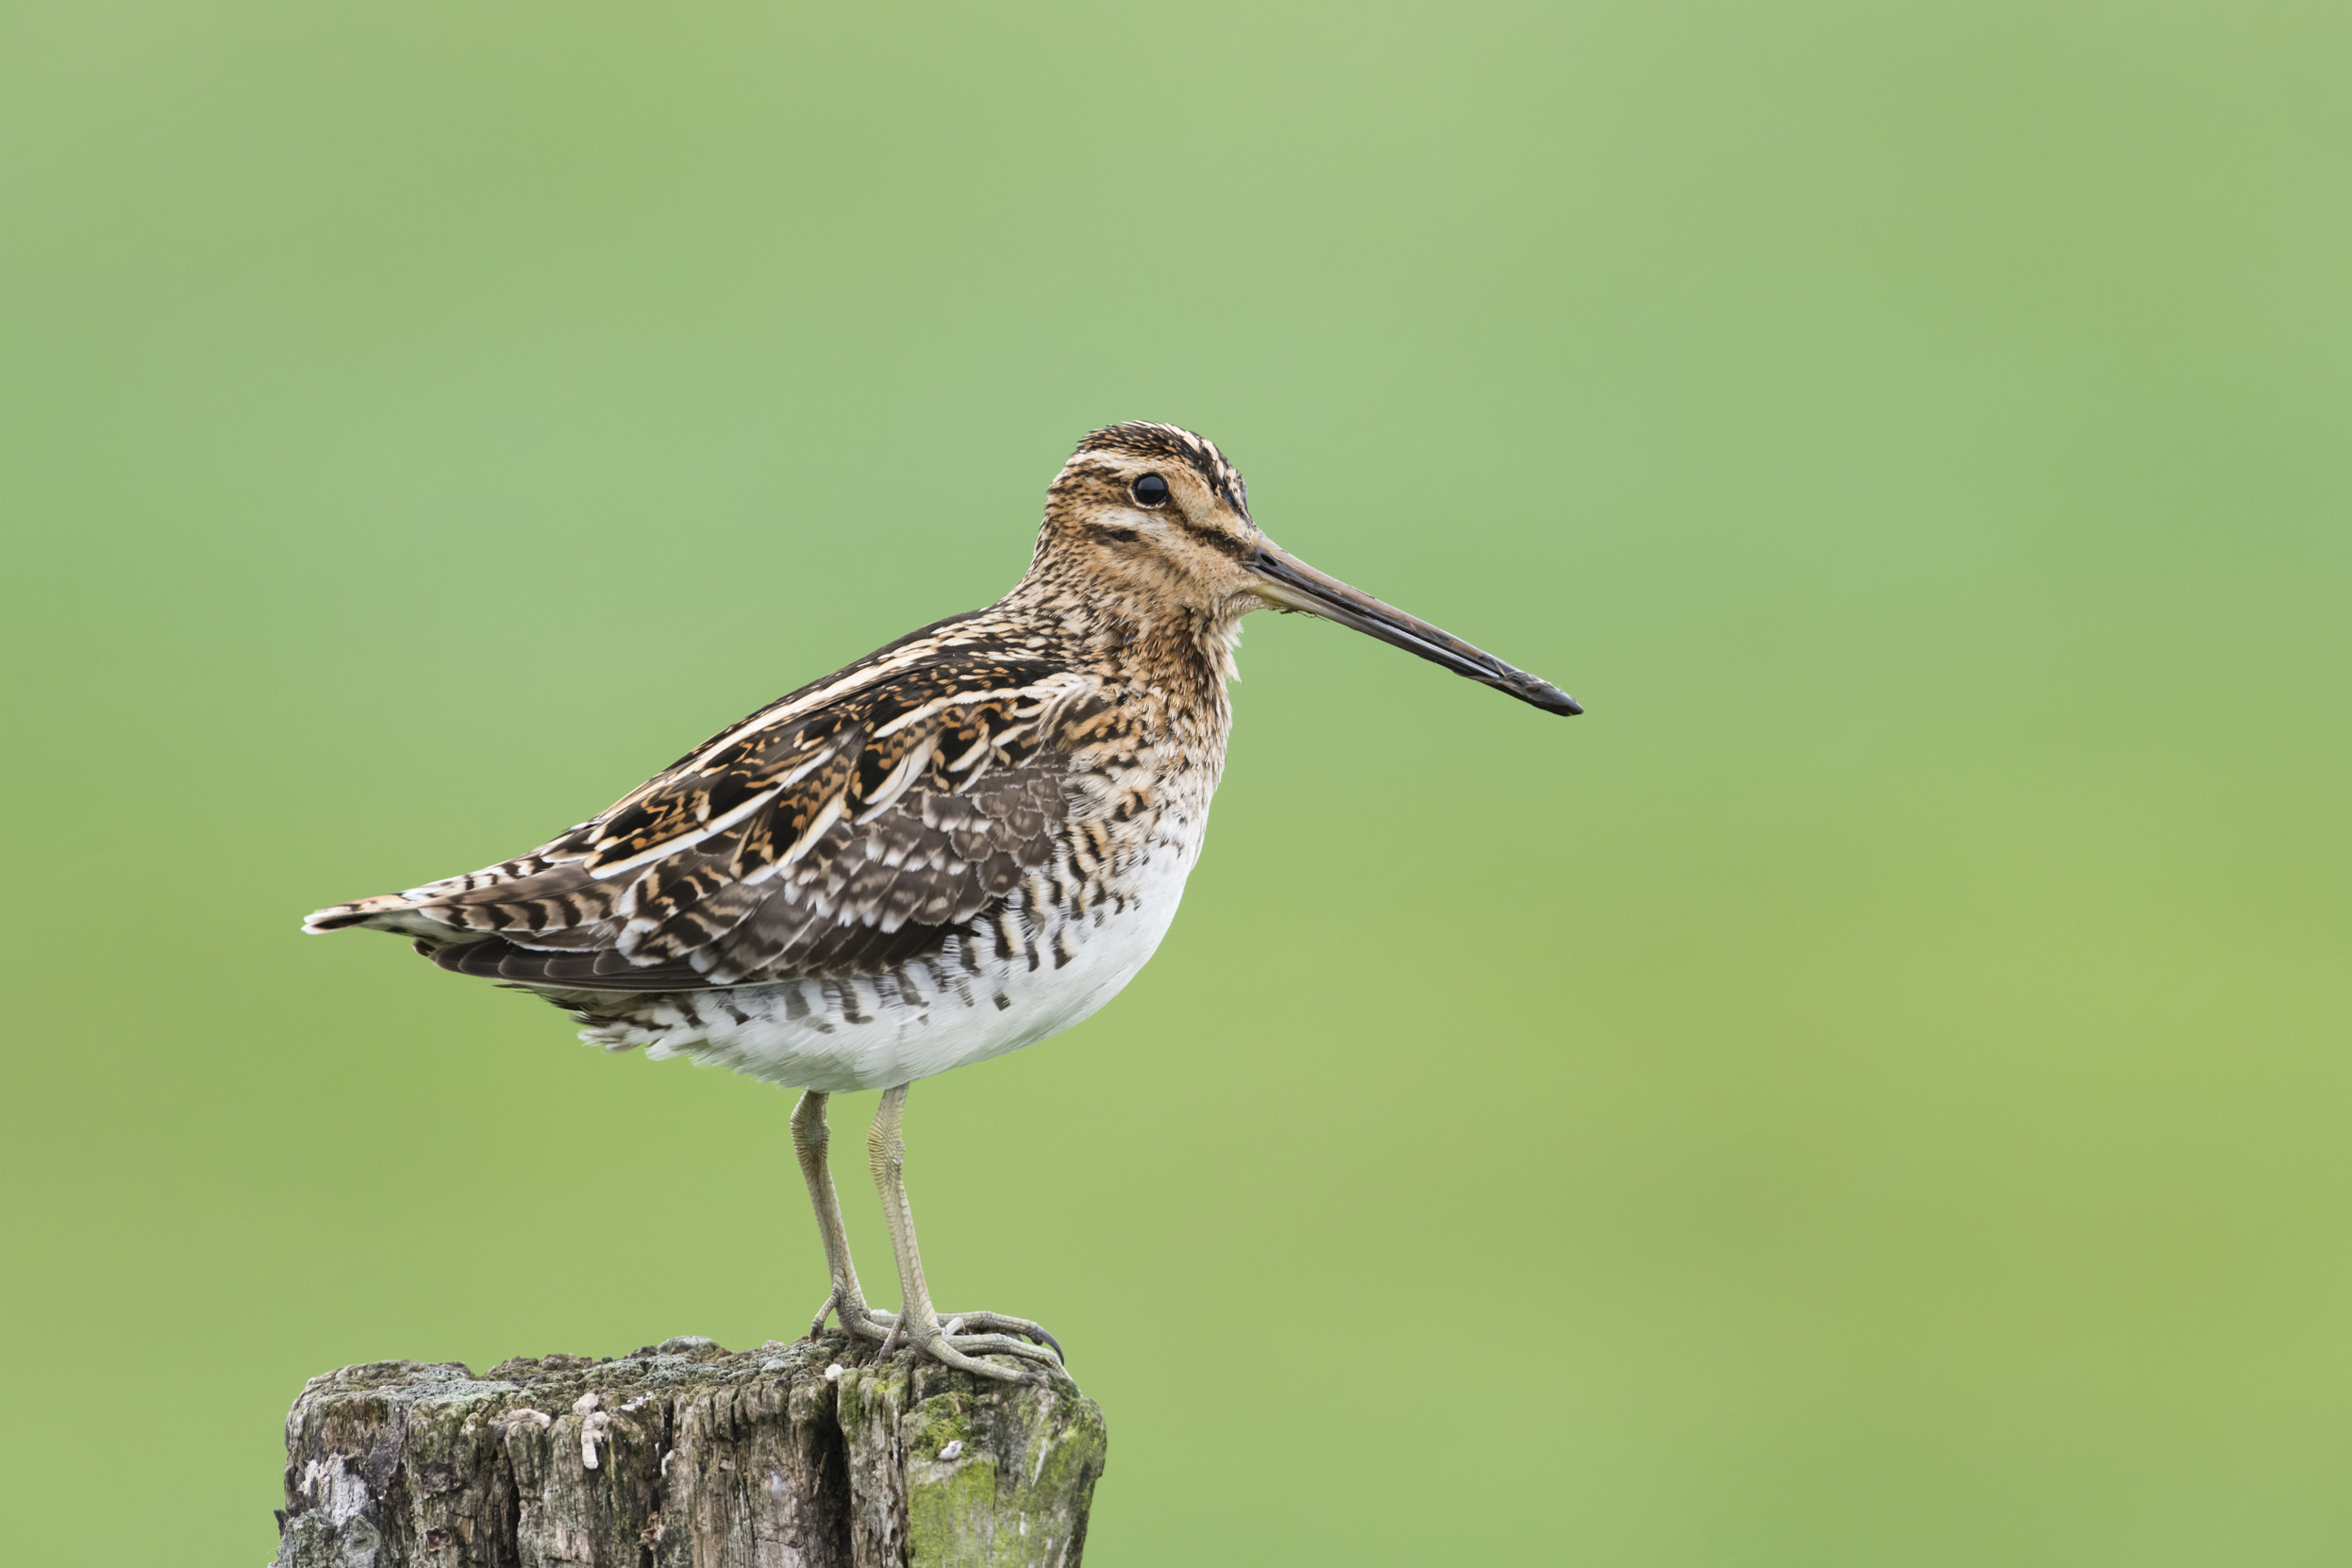 A lone Snipe perched upon a wooden post.